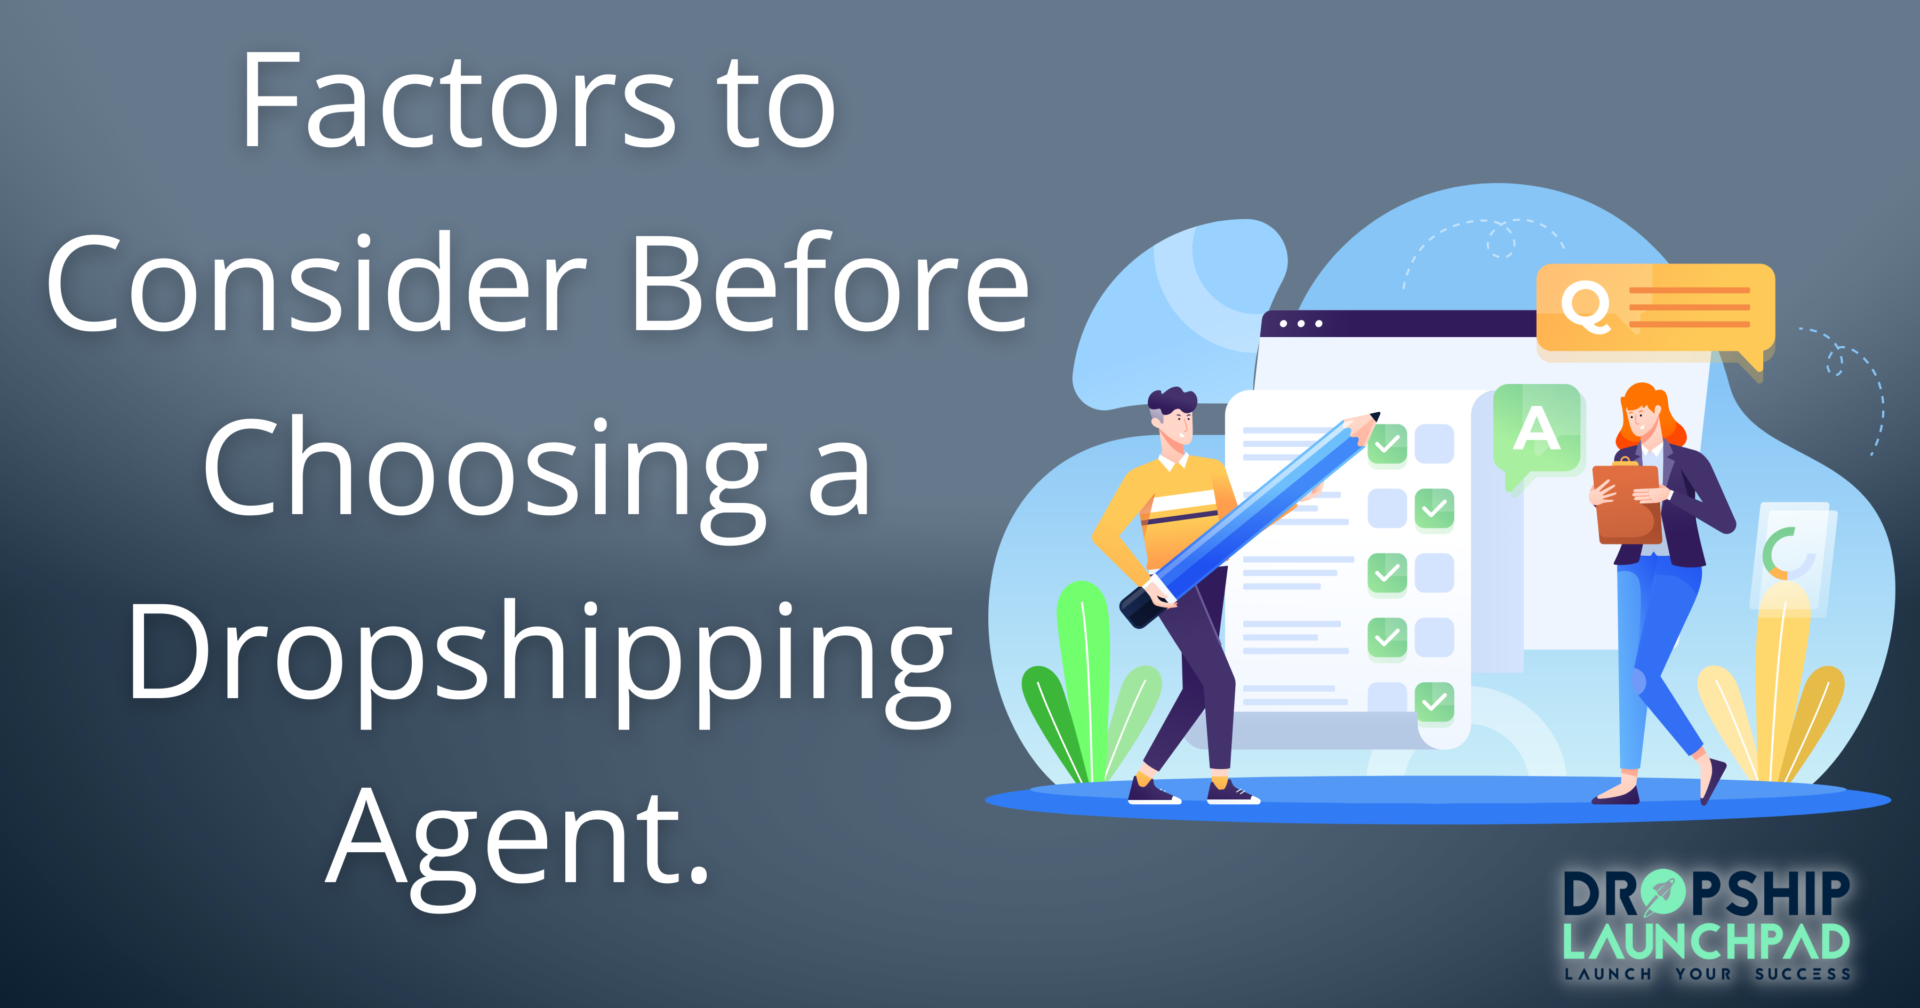 Factors to consider before choosing a dropshipping agent